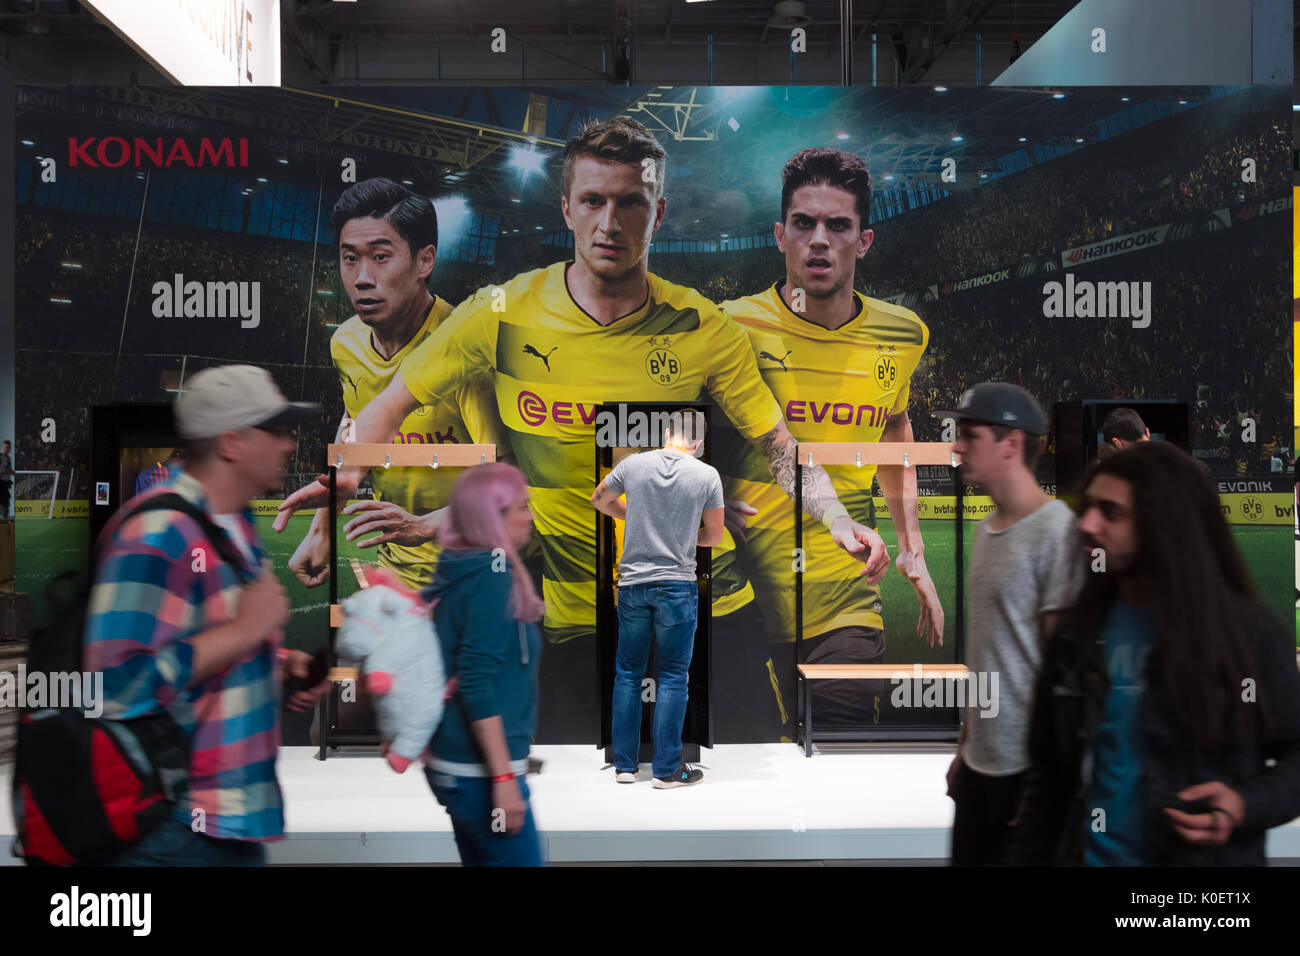 Cologne, Germany. 22nd Aug, 2017. Germany, Cologne, August 22, 2017, Gamescom: Booth of Borussia Dortmund BVB Edition of Konami. Credit: Juergen Schwarz/Alamy Live News Stock Photo